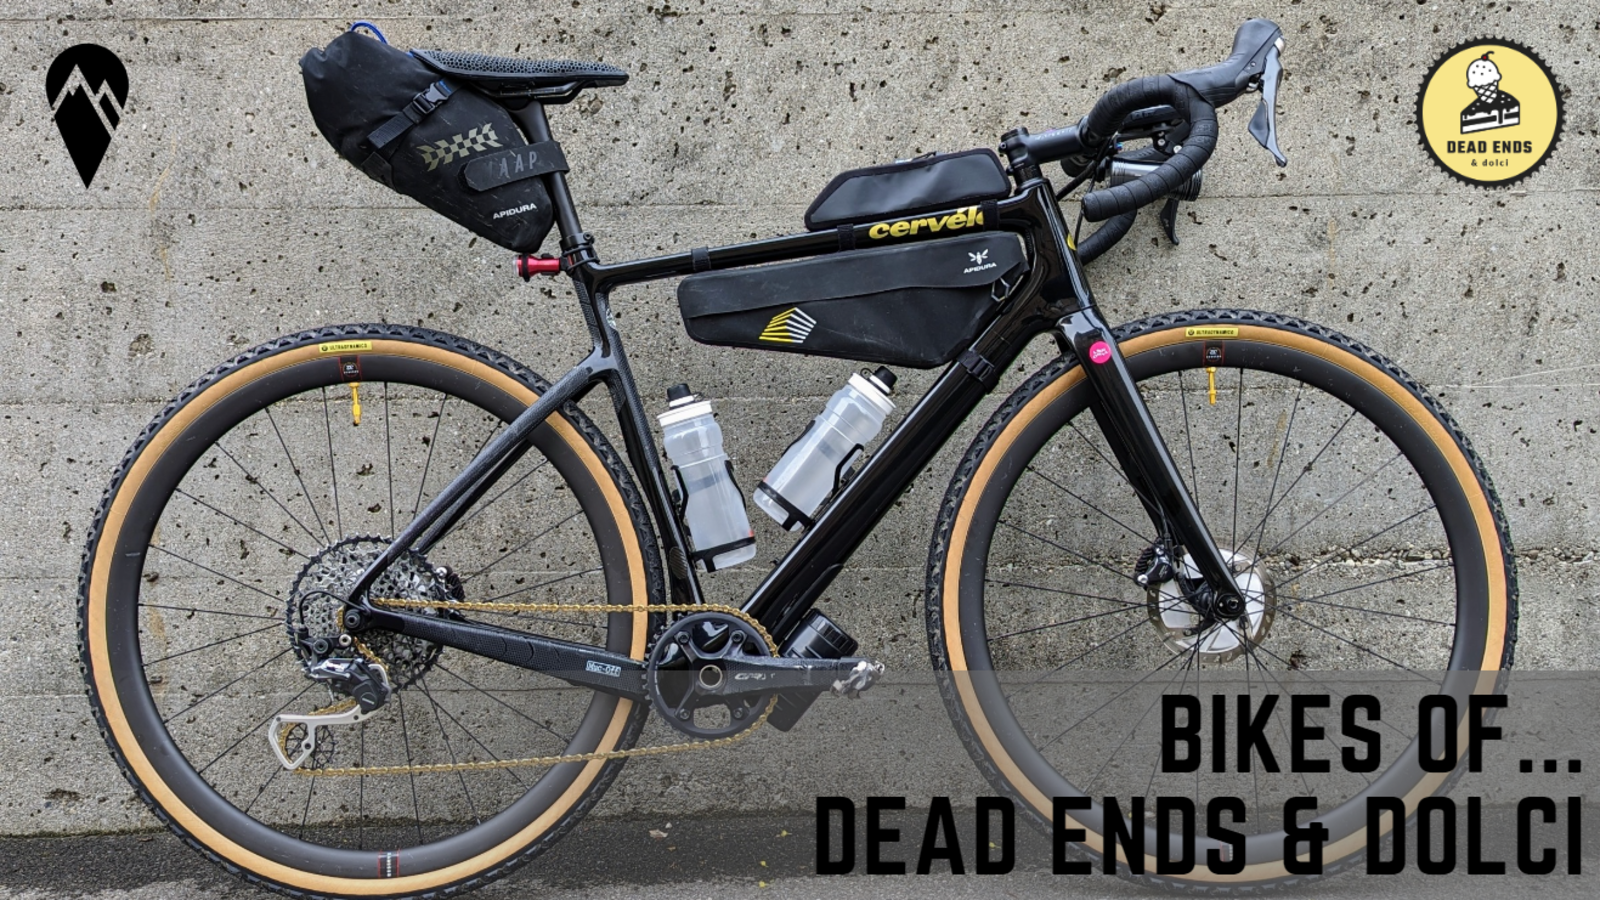 Bikes of DEAD ENDS & dolci 2023